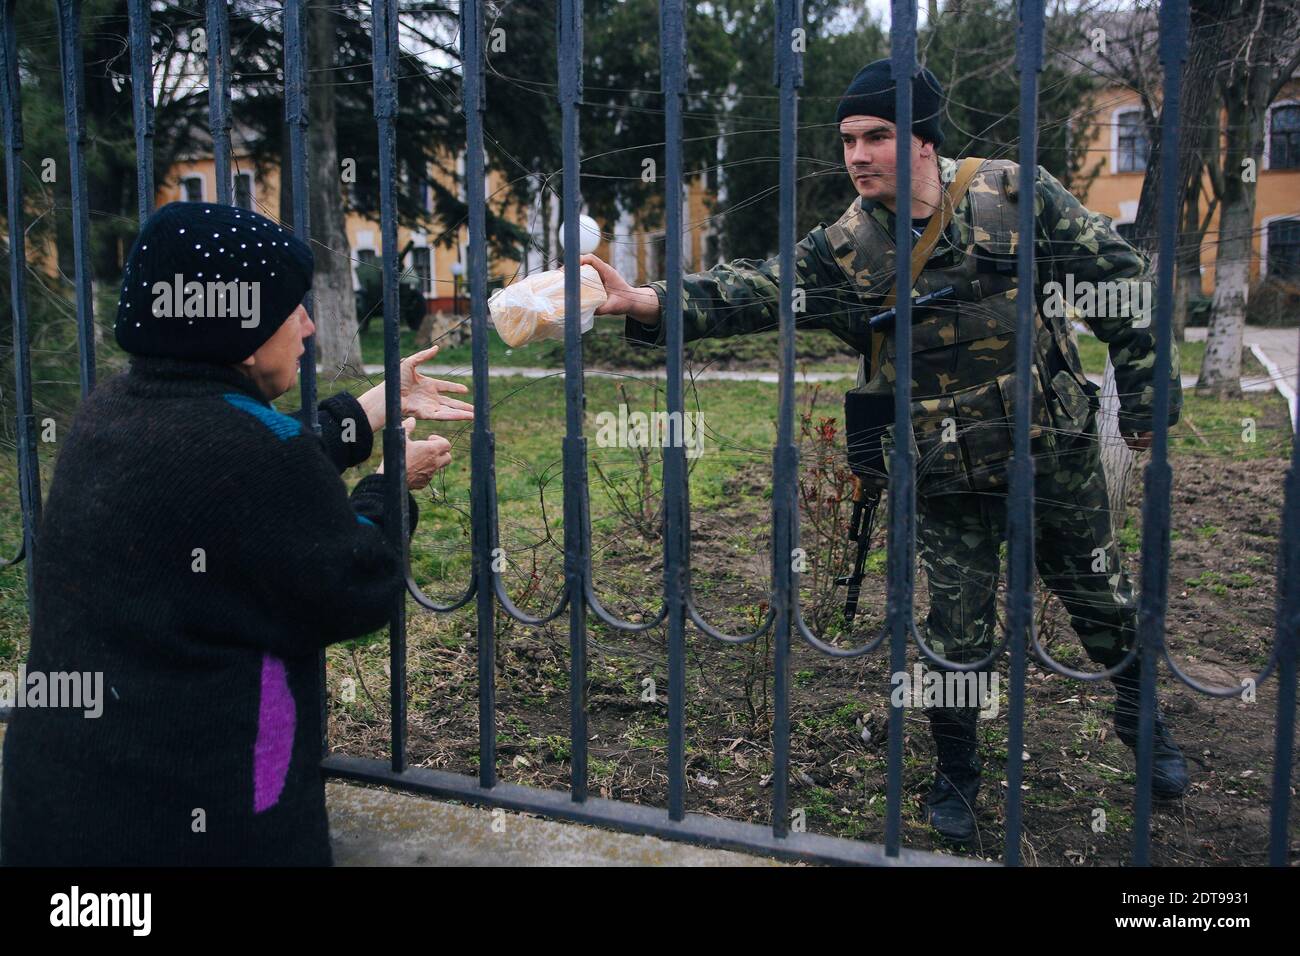 A woman gives food to a Ukranian soldier standing guard inside the Ukranian base in Simferopol. Simferopol, Ukraine, on March 19, 2014. Tensions are rising in Crimea after pro-Russia forces seized two naval bases including Ukraine's navy HQ. Russia has called on authorities there to release the detained commander of the Ukrainian navy. Photo by Rafael Yaghobzadeh/ABACAPRESS.COM Stock Photo